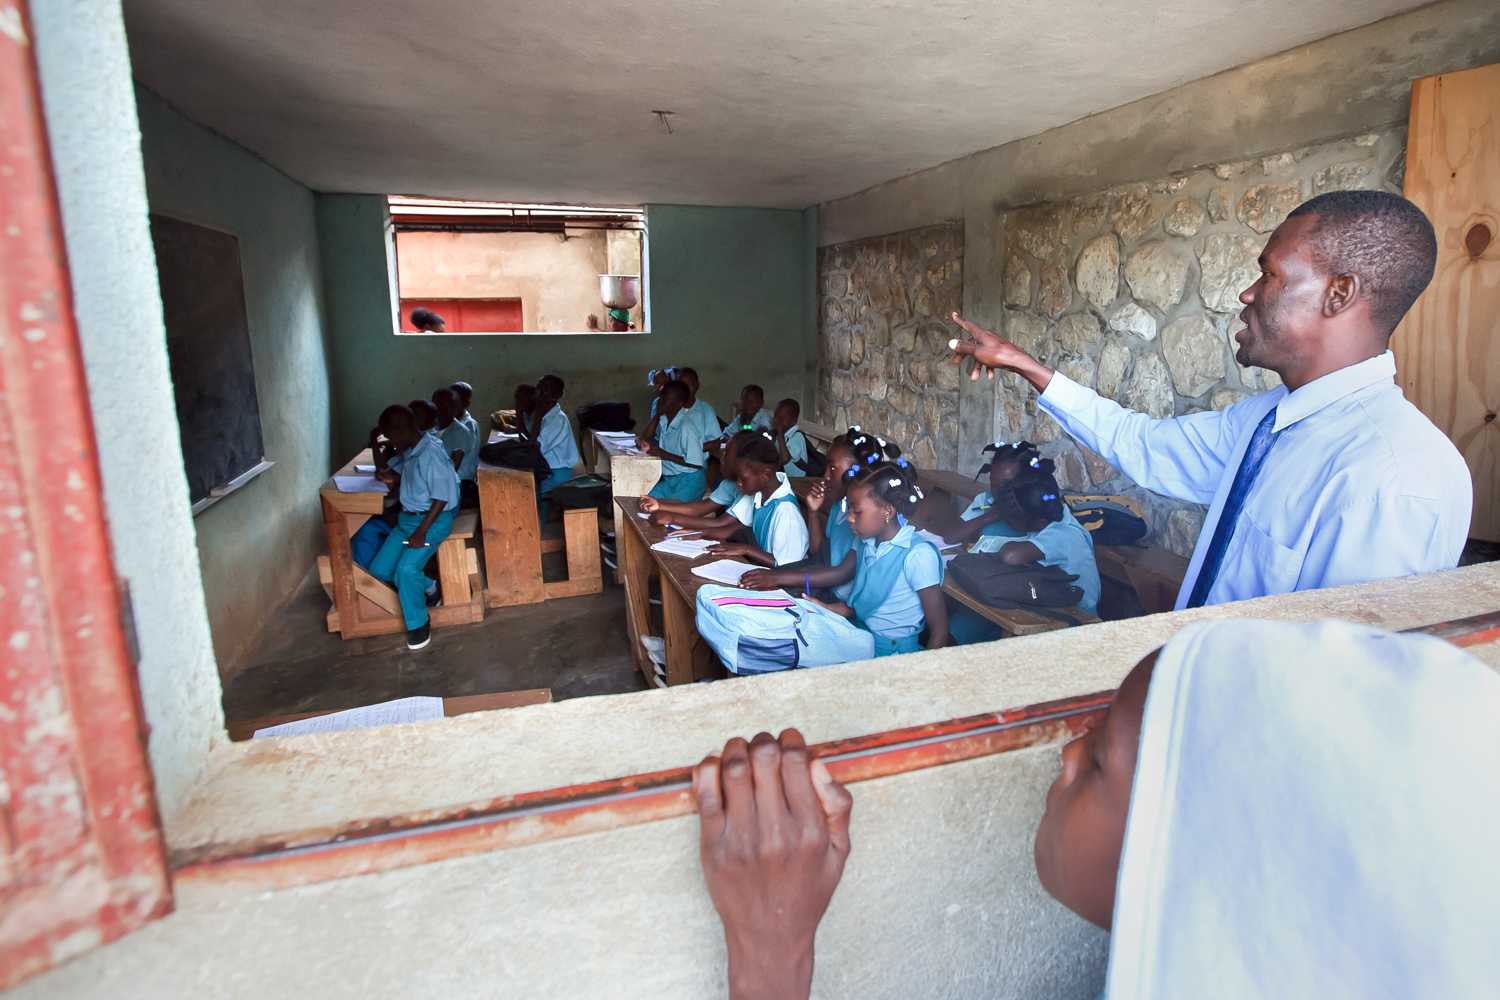  The opportunity for free education at Gramothe's school draws children from miles away. Some walk four hours a day to attend in return for the prospect of a brighter future. 